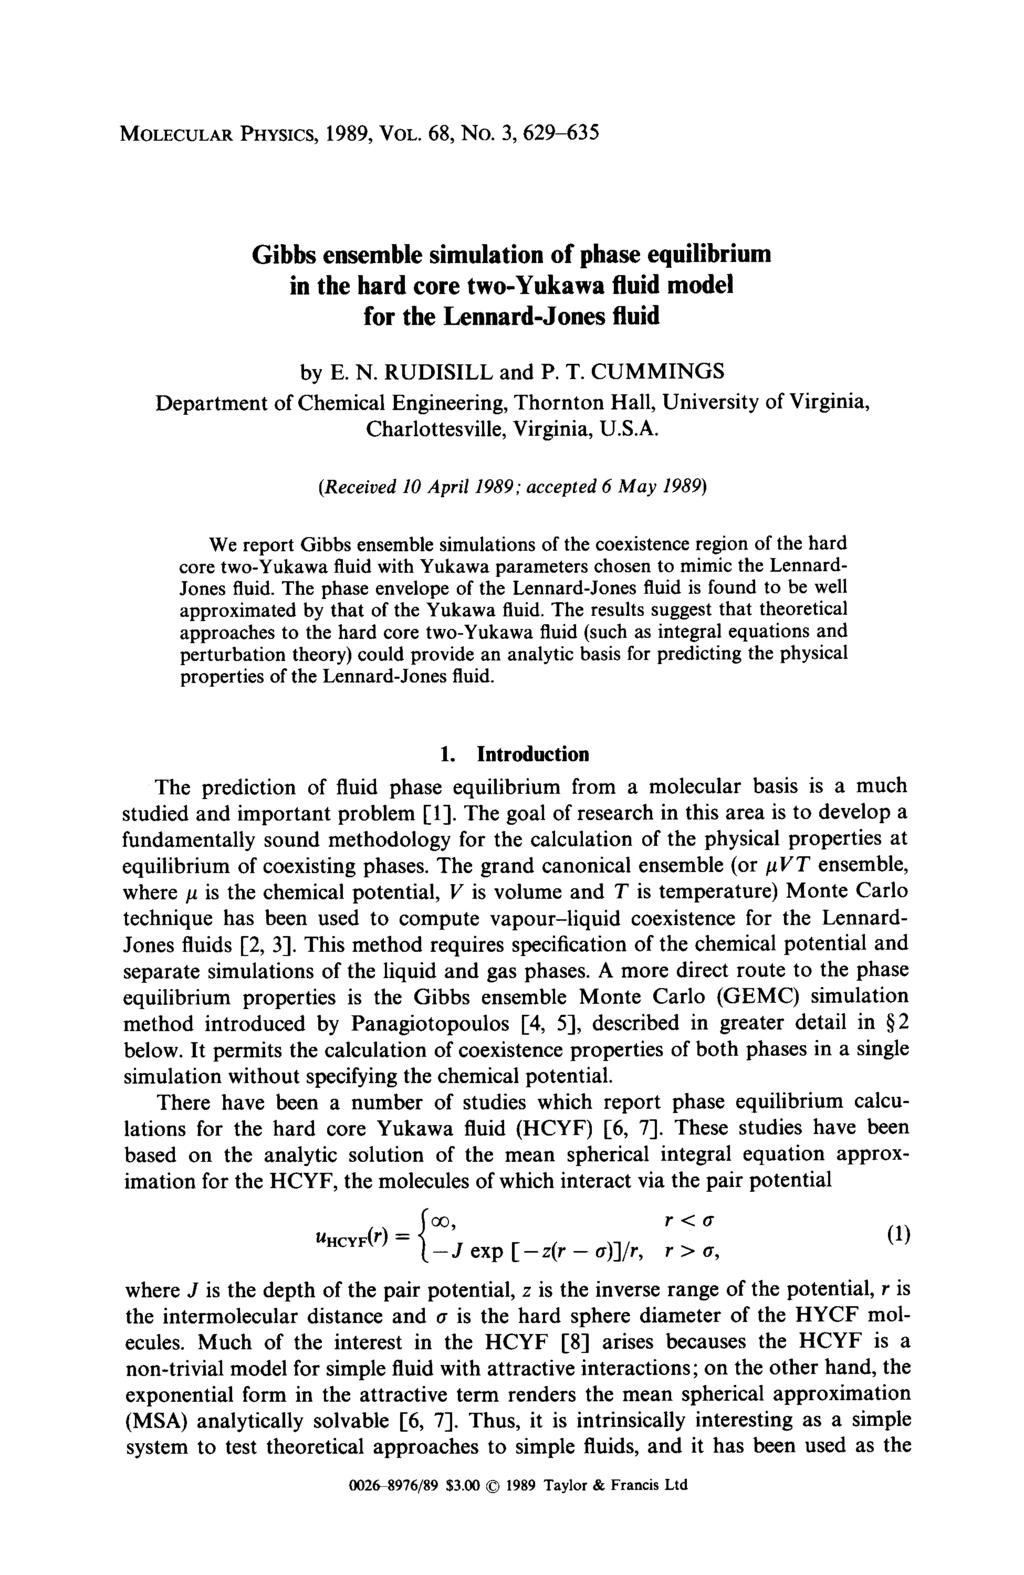 MOLECULAR PHYSICS, 1989, VOL. 68, No. 3, 629-635 Gibbs ensemble simulation of phase equilibrium in the hard core two-yukawa fluid model for the Lennard-Jones fluid by E. N. RUDISILL and P. T.